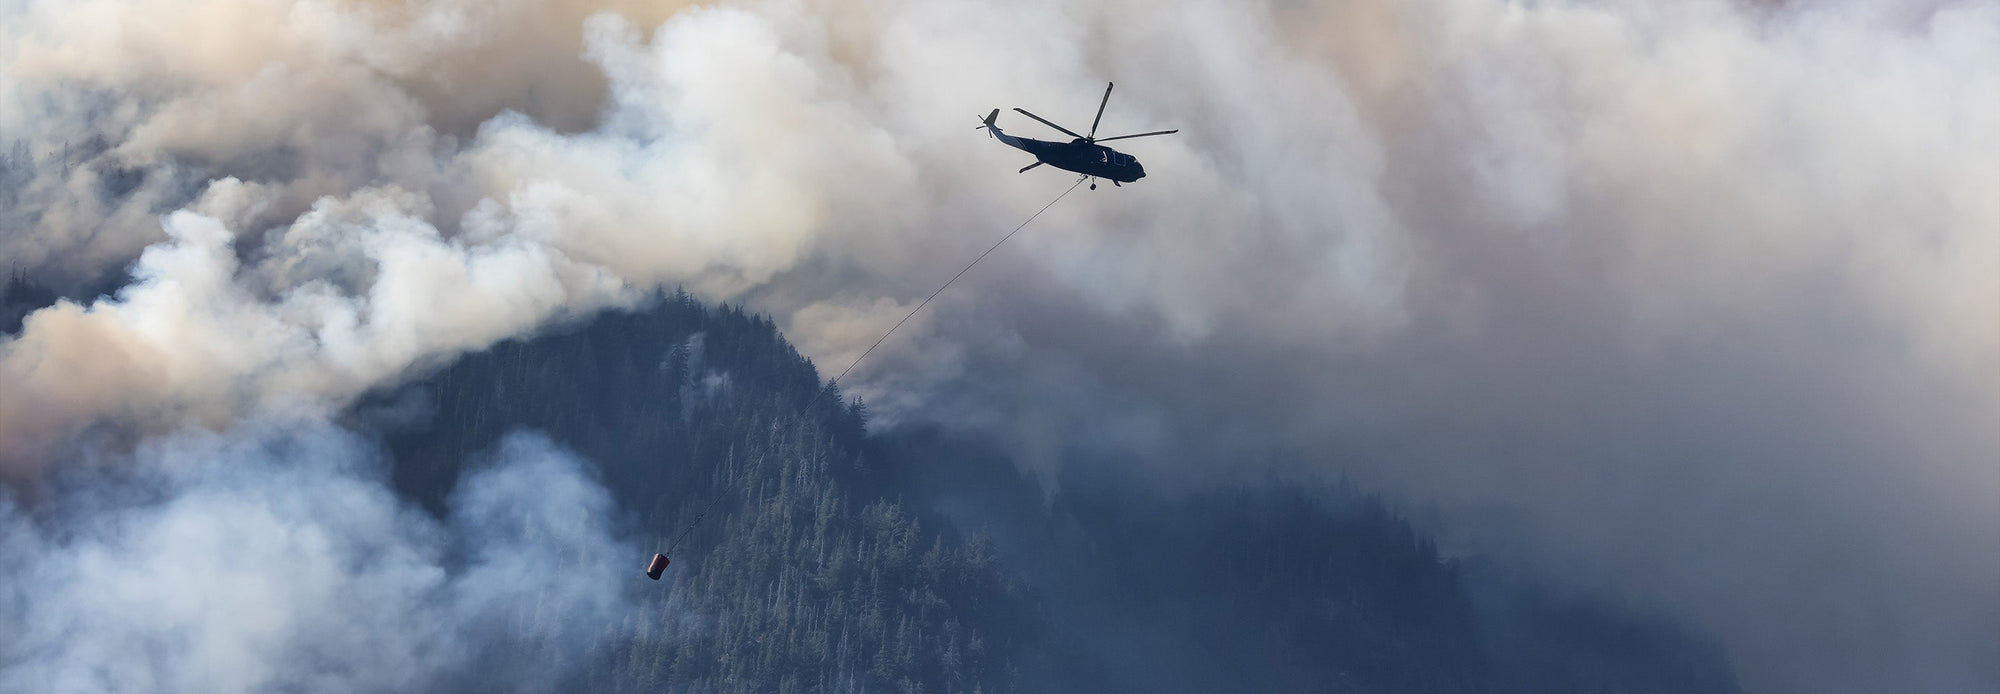 helicopter flying over wildfire